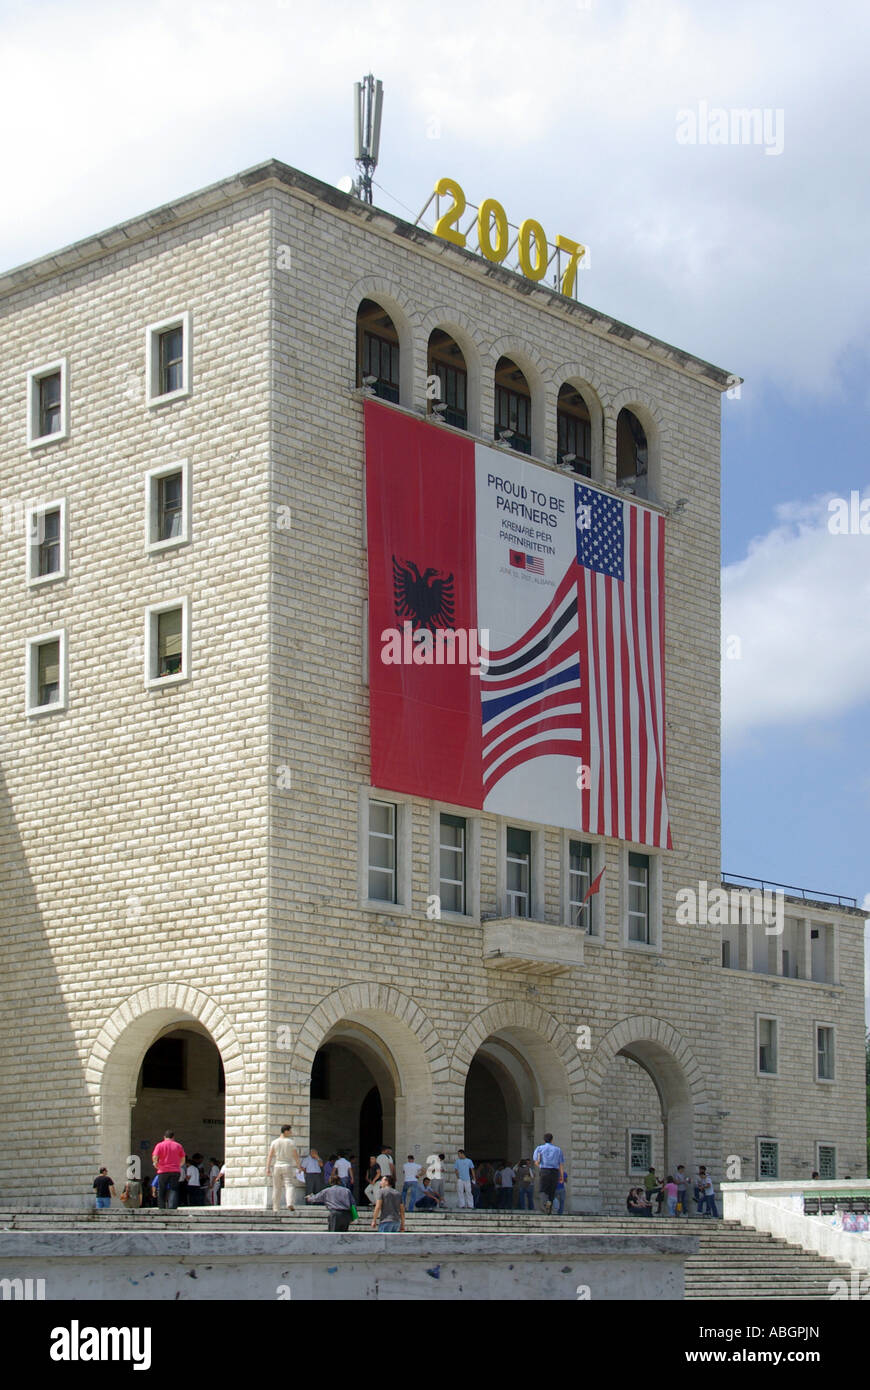 Students & façade of Tirana university building political banner about visit of USA President George W Bush in June 2007 to Republic of Albania Stock Photo